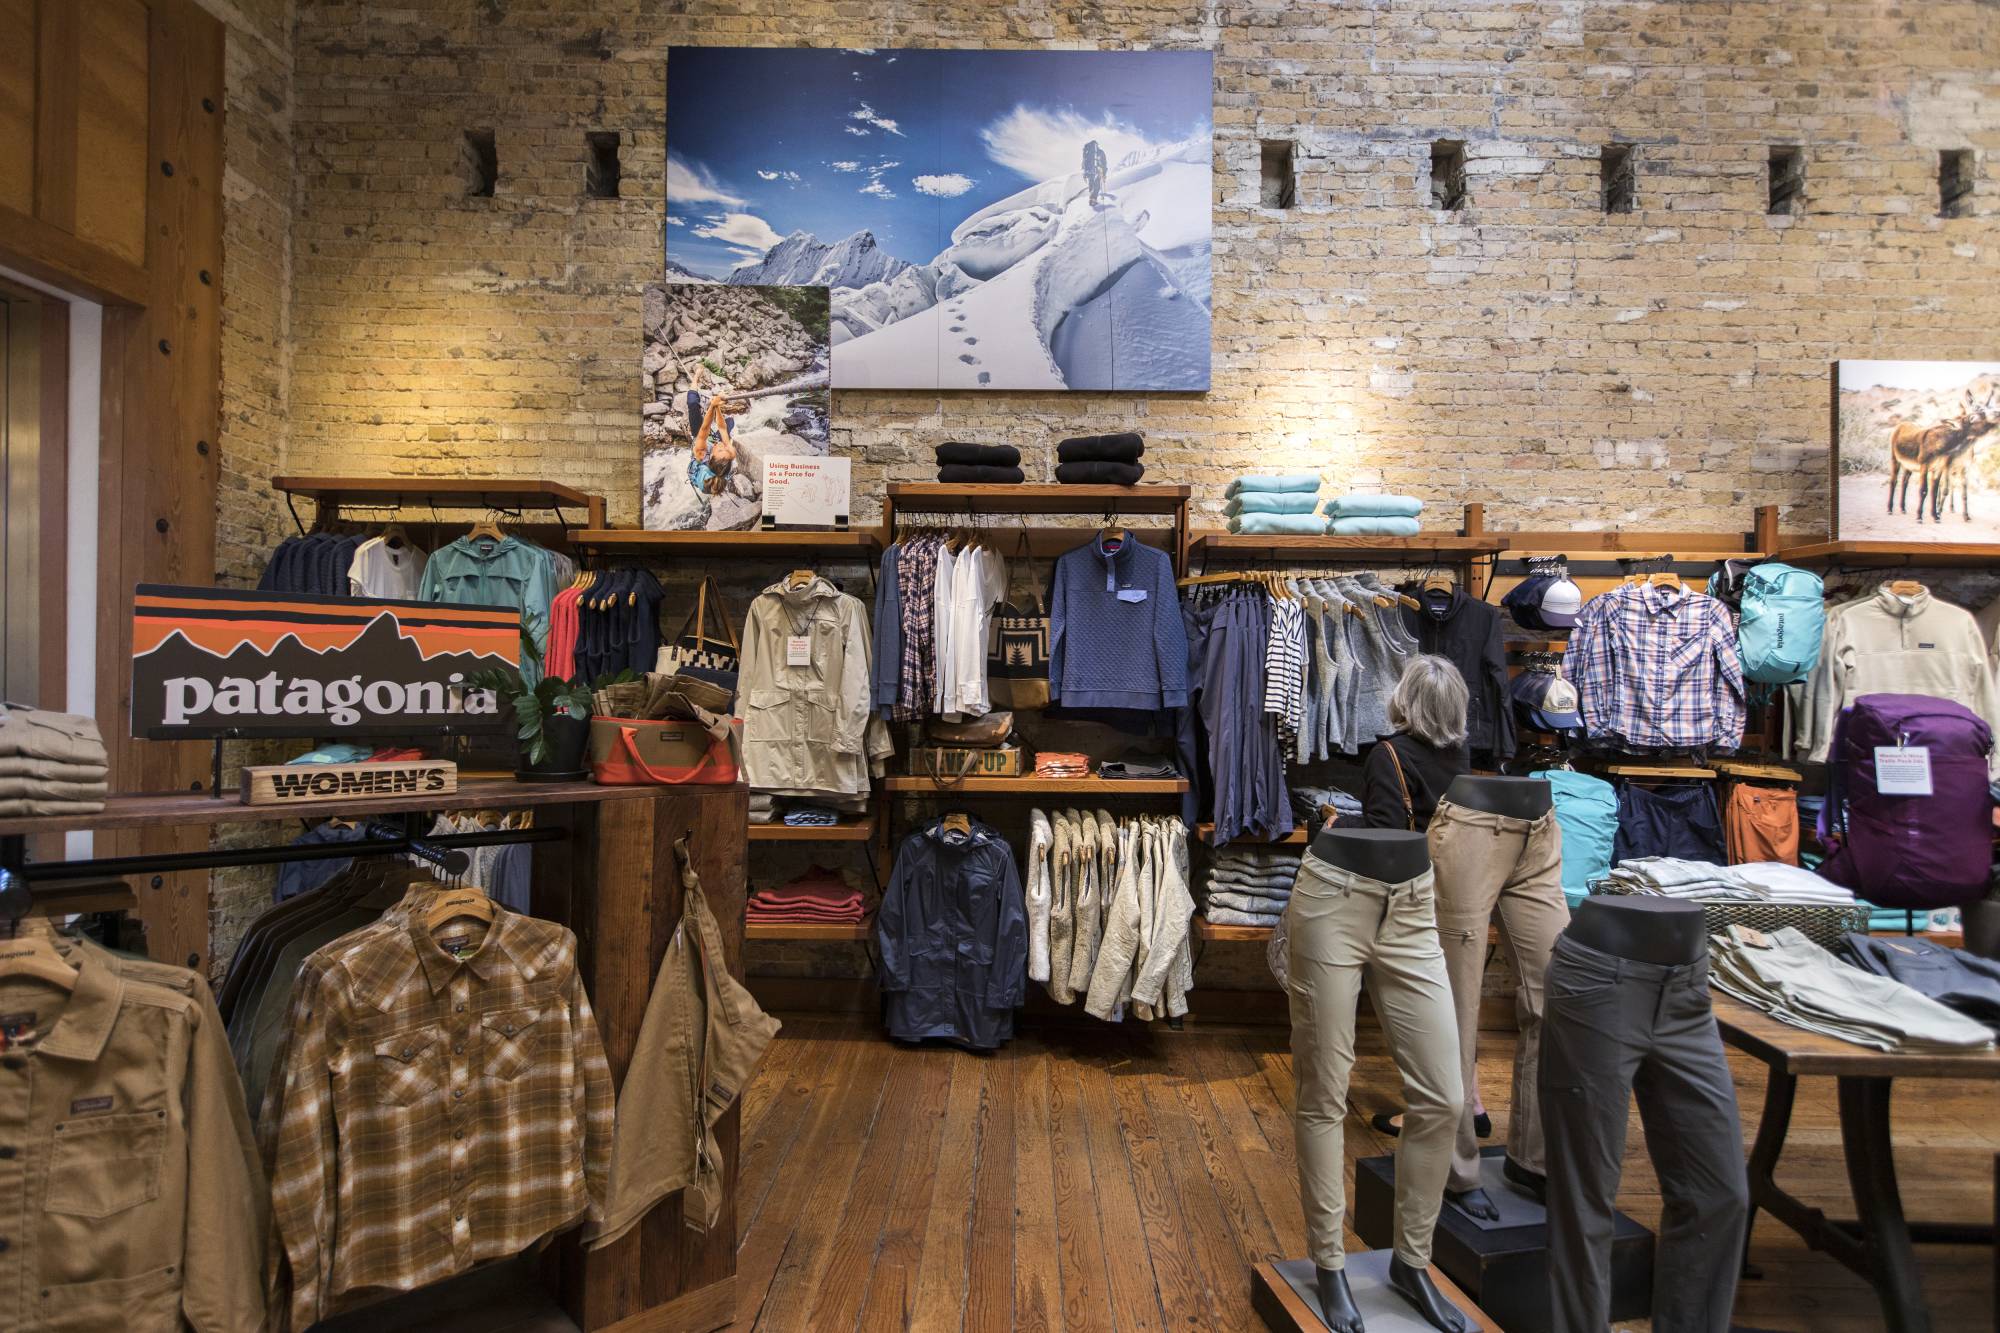 A Patagonia store on the company’s campus in Ventura, California, in April 2018 | LAURE JOLIET / THE NEW YORK TIMES